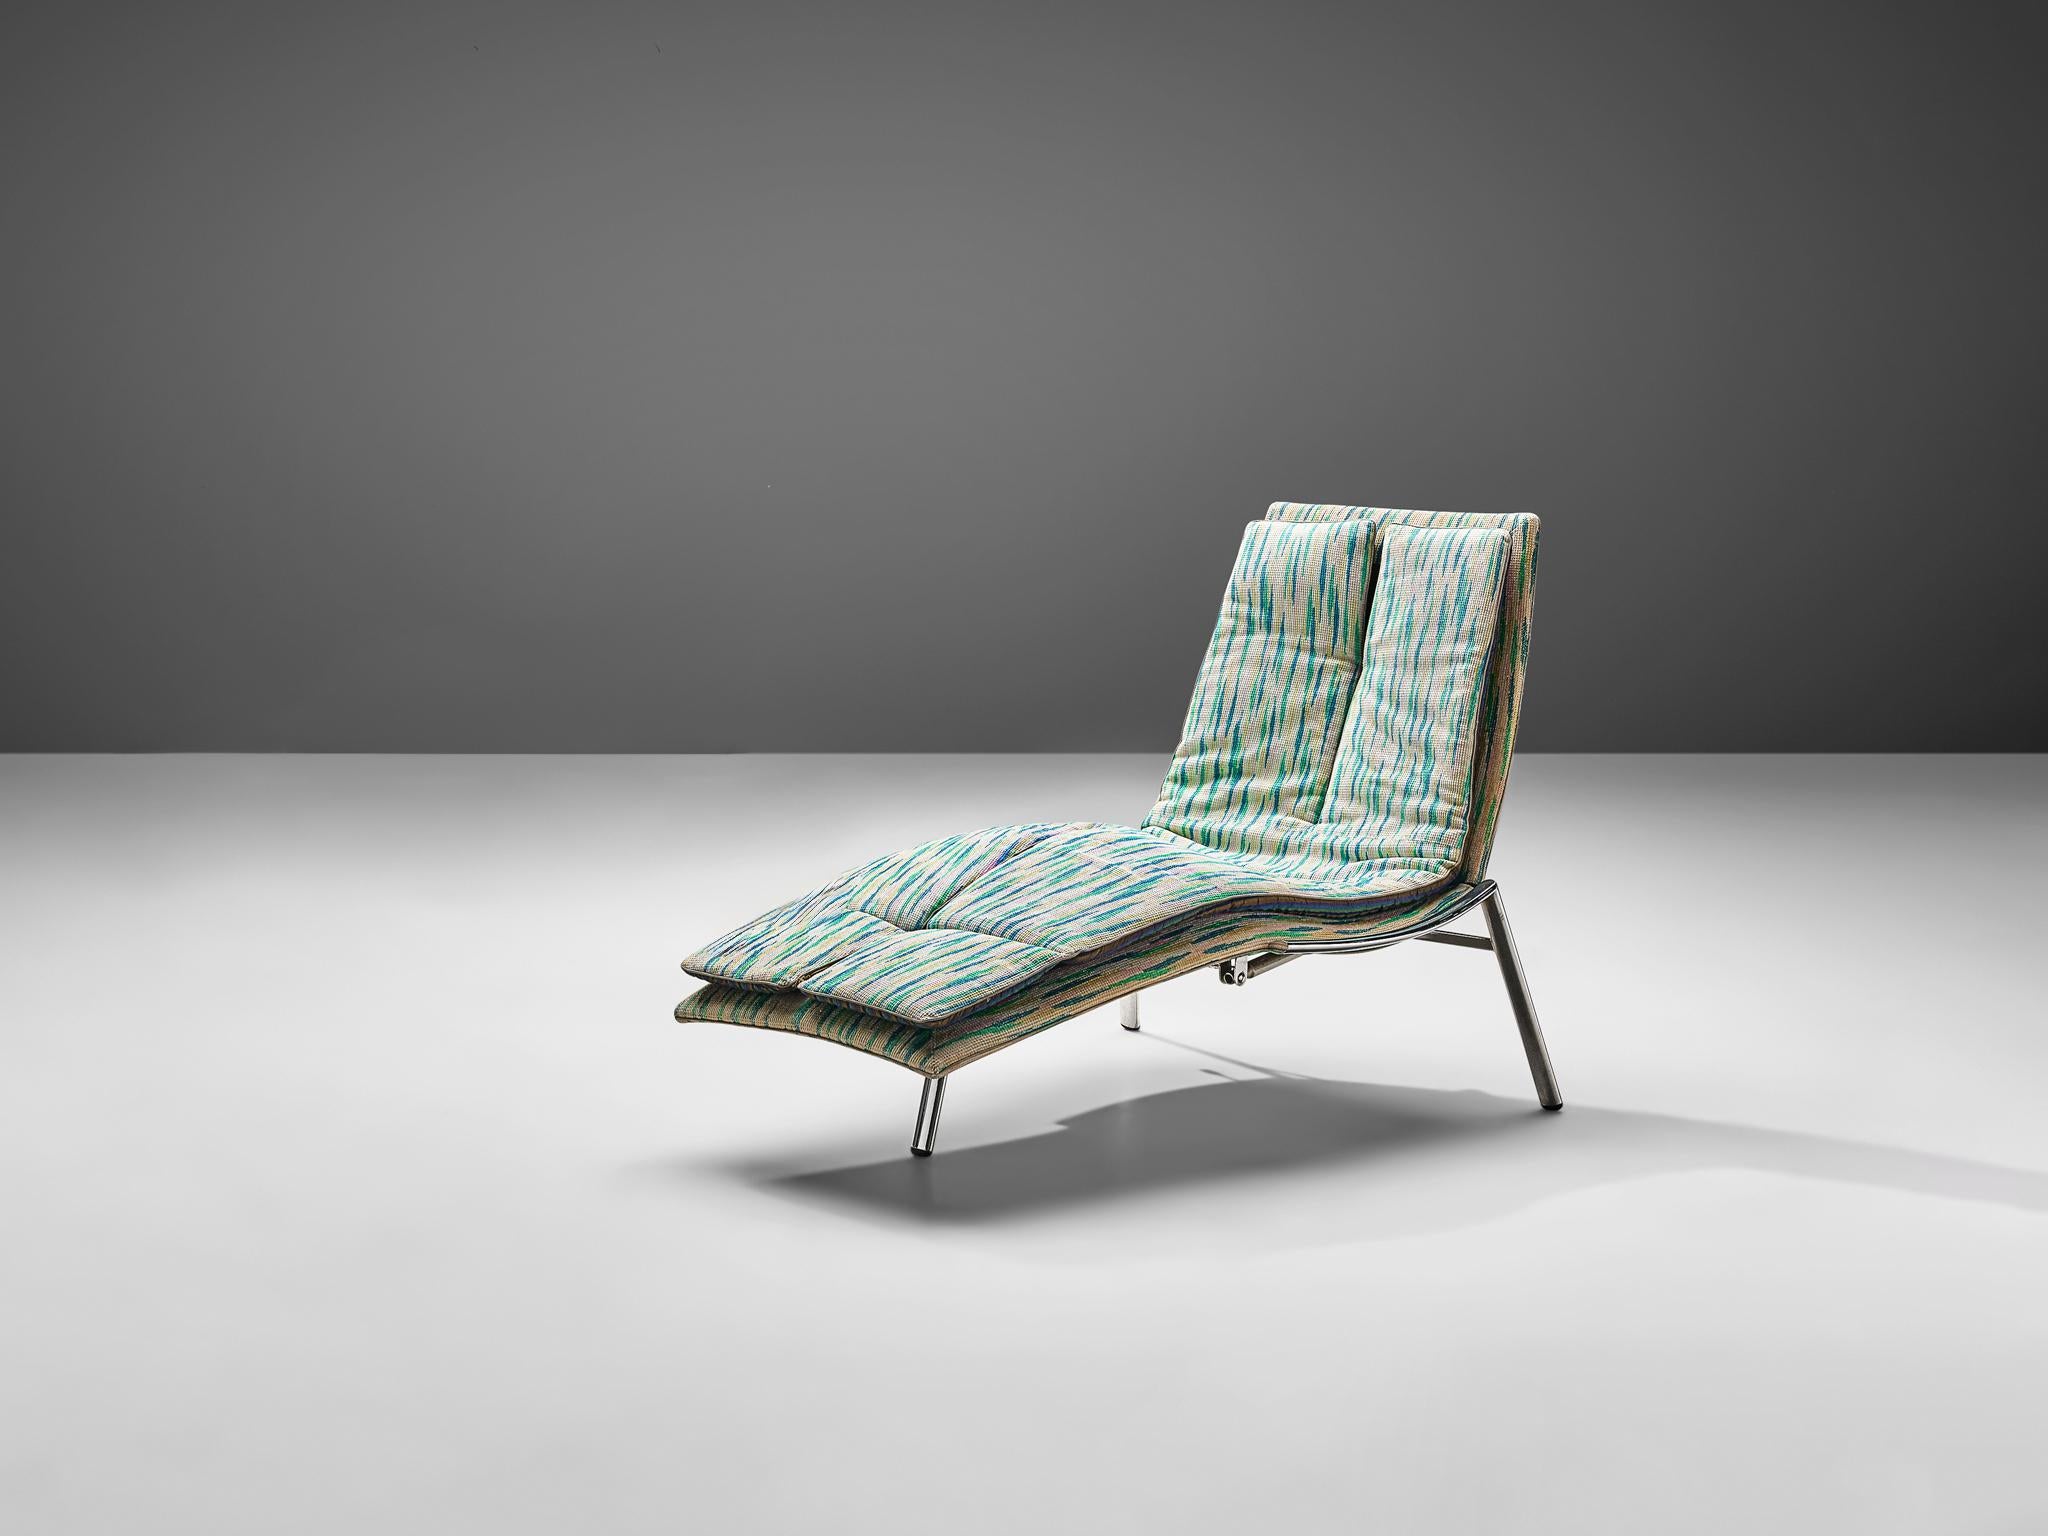 Giovanni Offredi for Saporiti Italia, chaise longue, chrome-plated metal, textured multicolored fabric, Italy, 1970s

This exquisite lounge chair, designed by Giovanni Offredi for the esteemed Italian manufacturer Saporiti, exudes comfort and style.